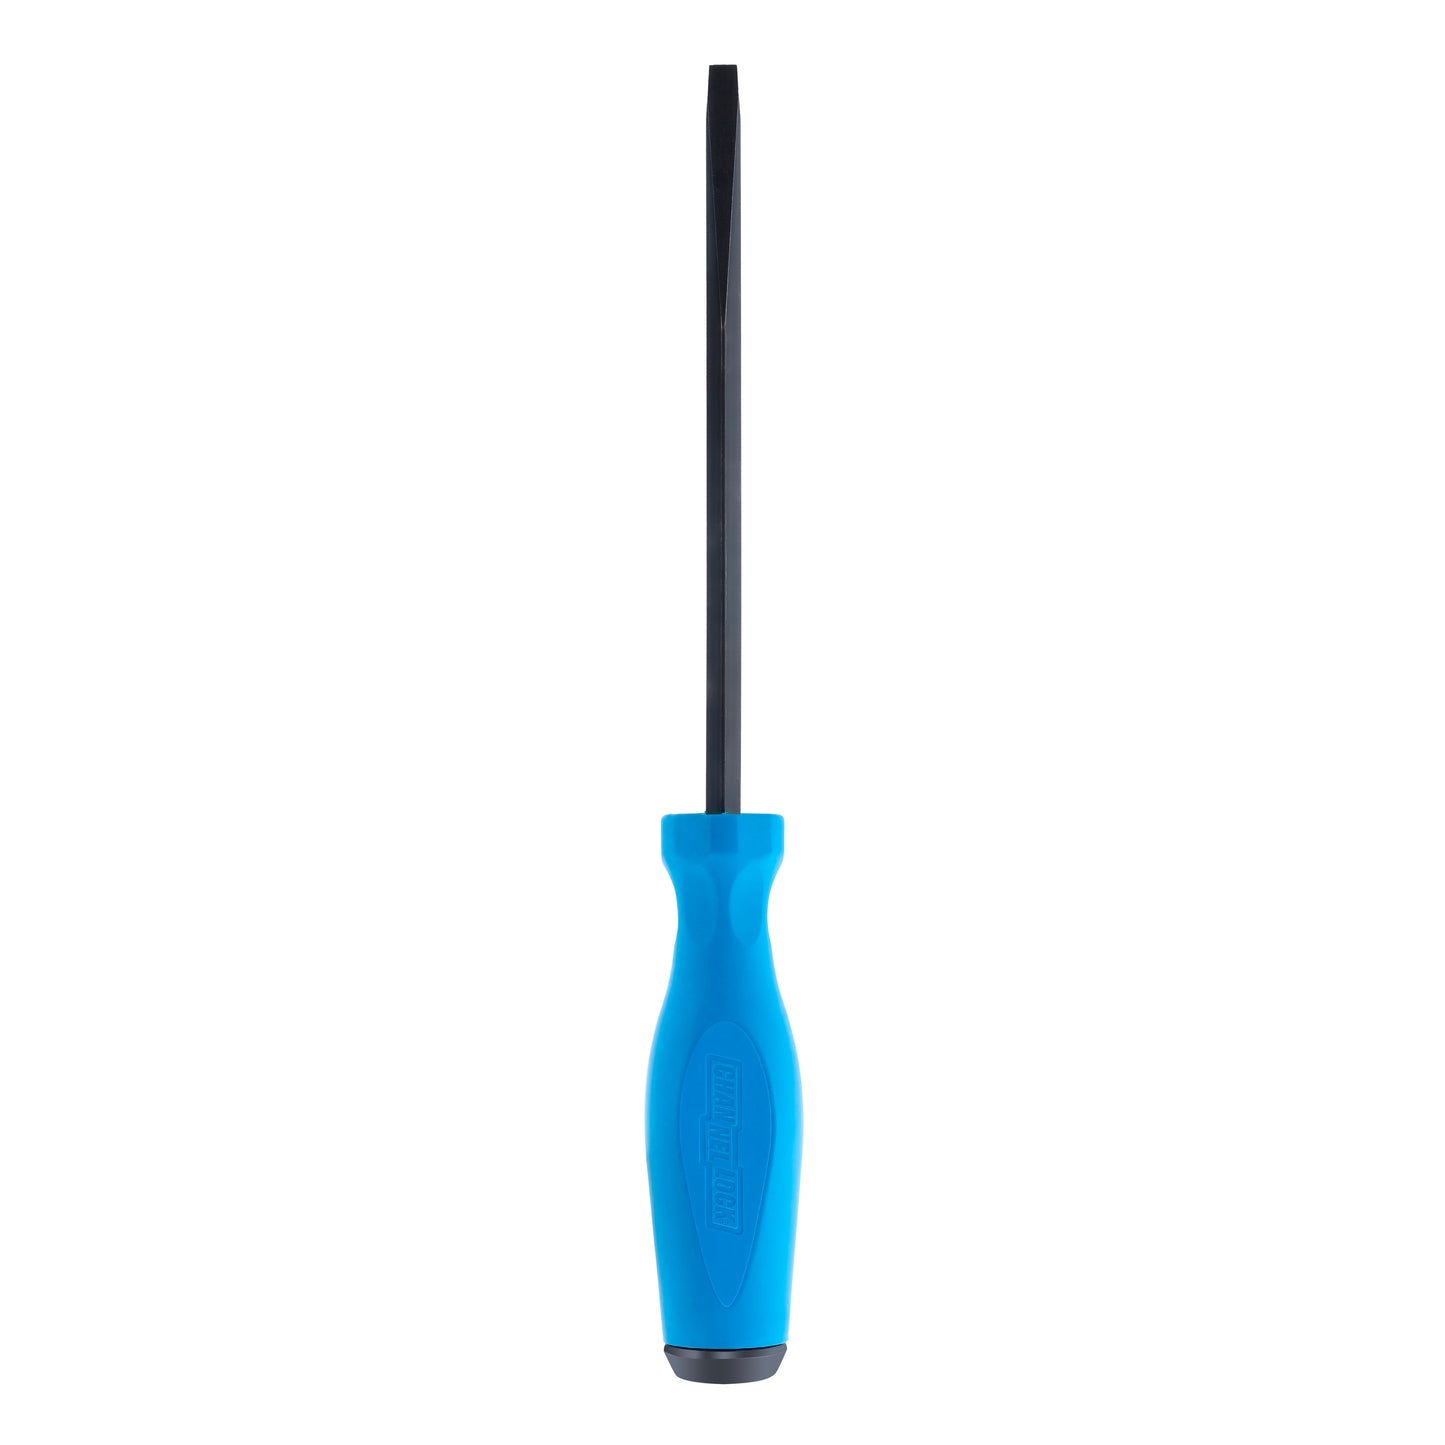 DS146H 1/4 x 6-inch Slotted Demolition Screwdriver